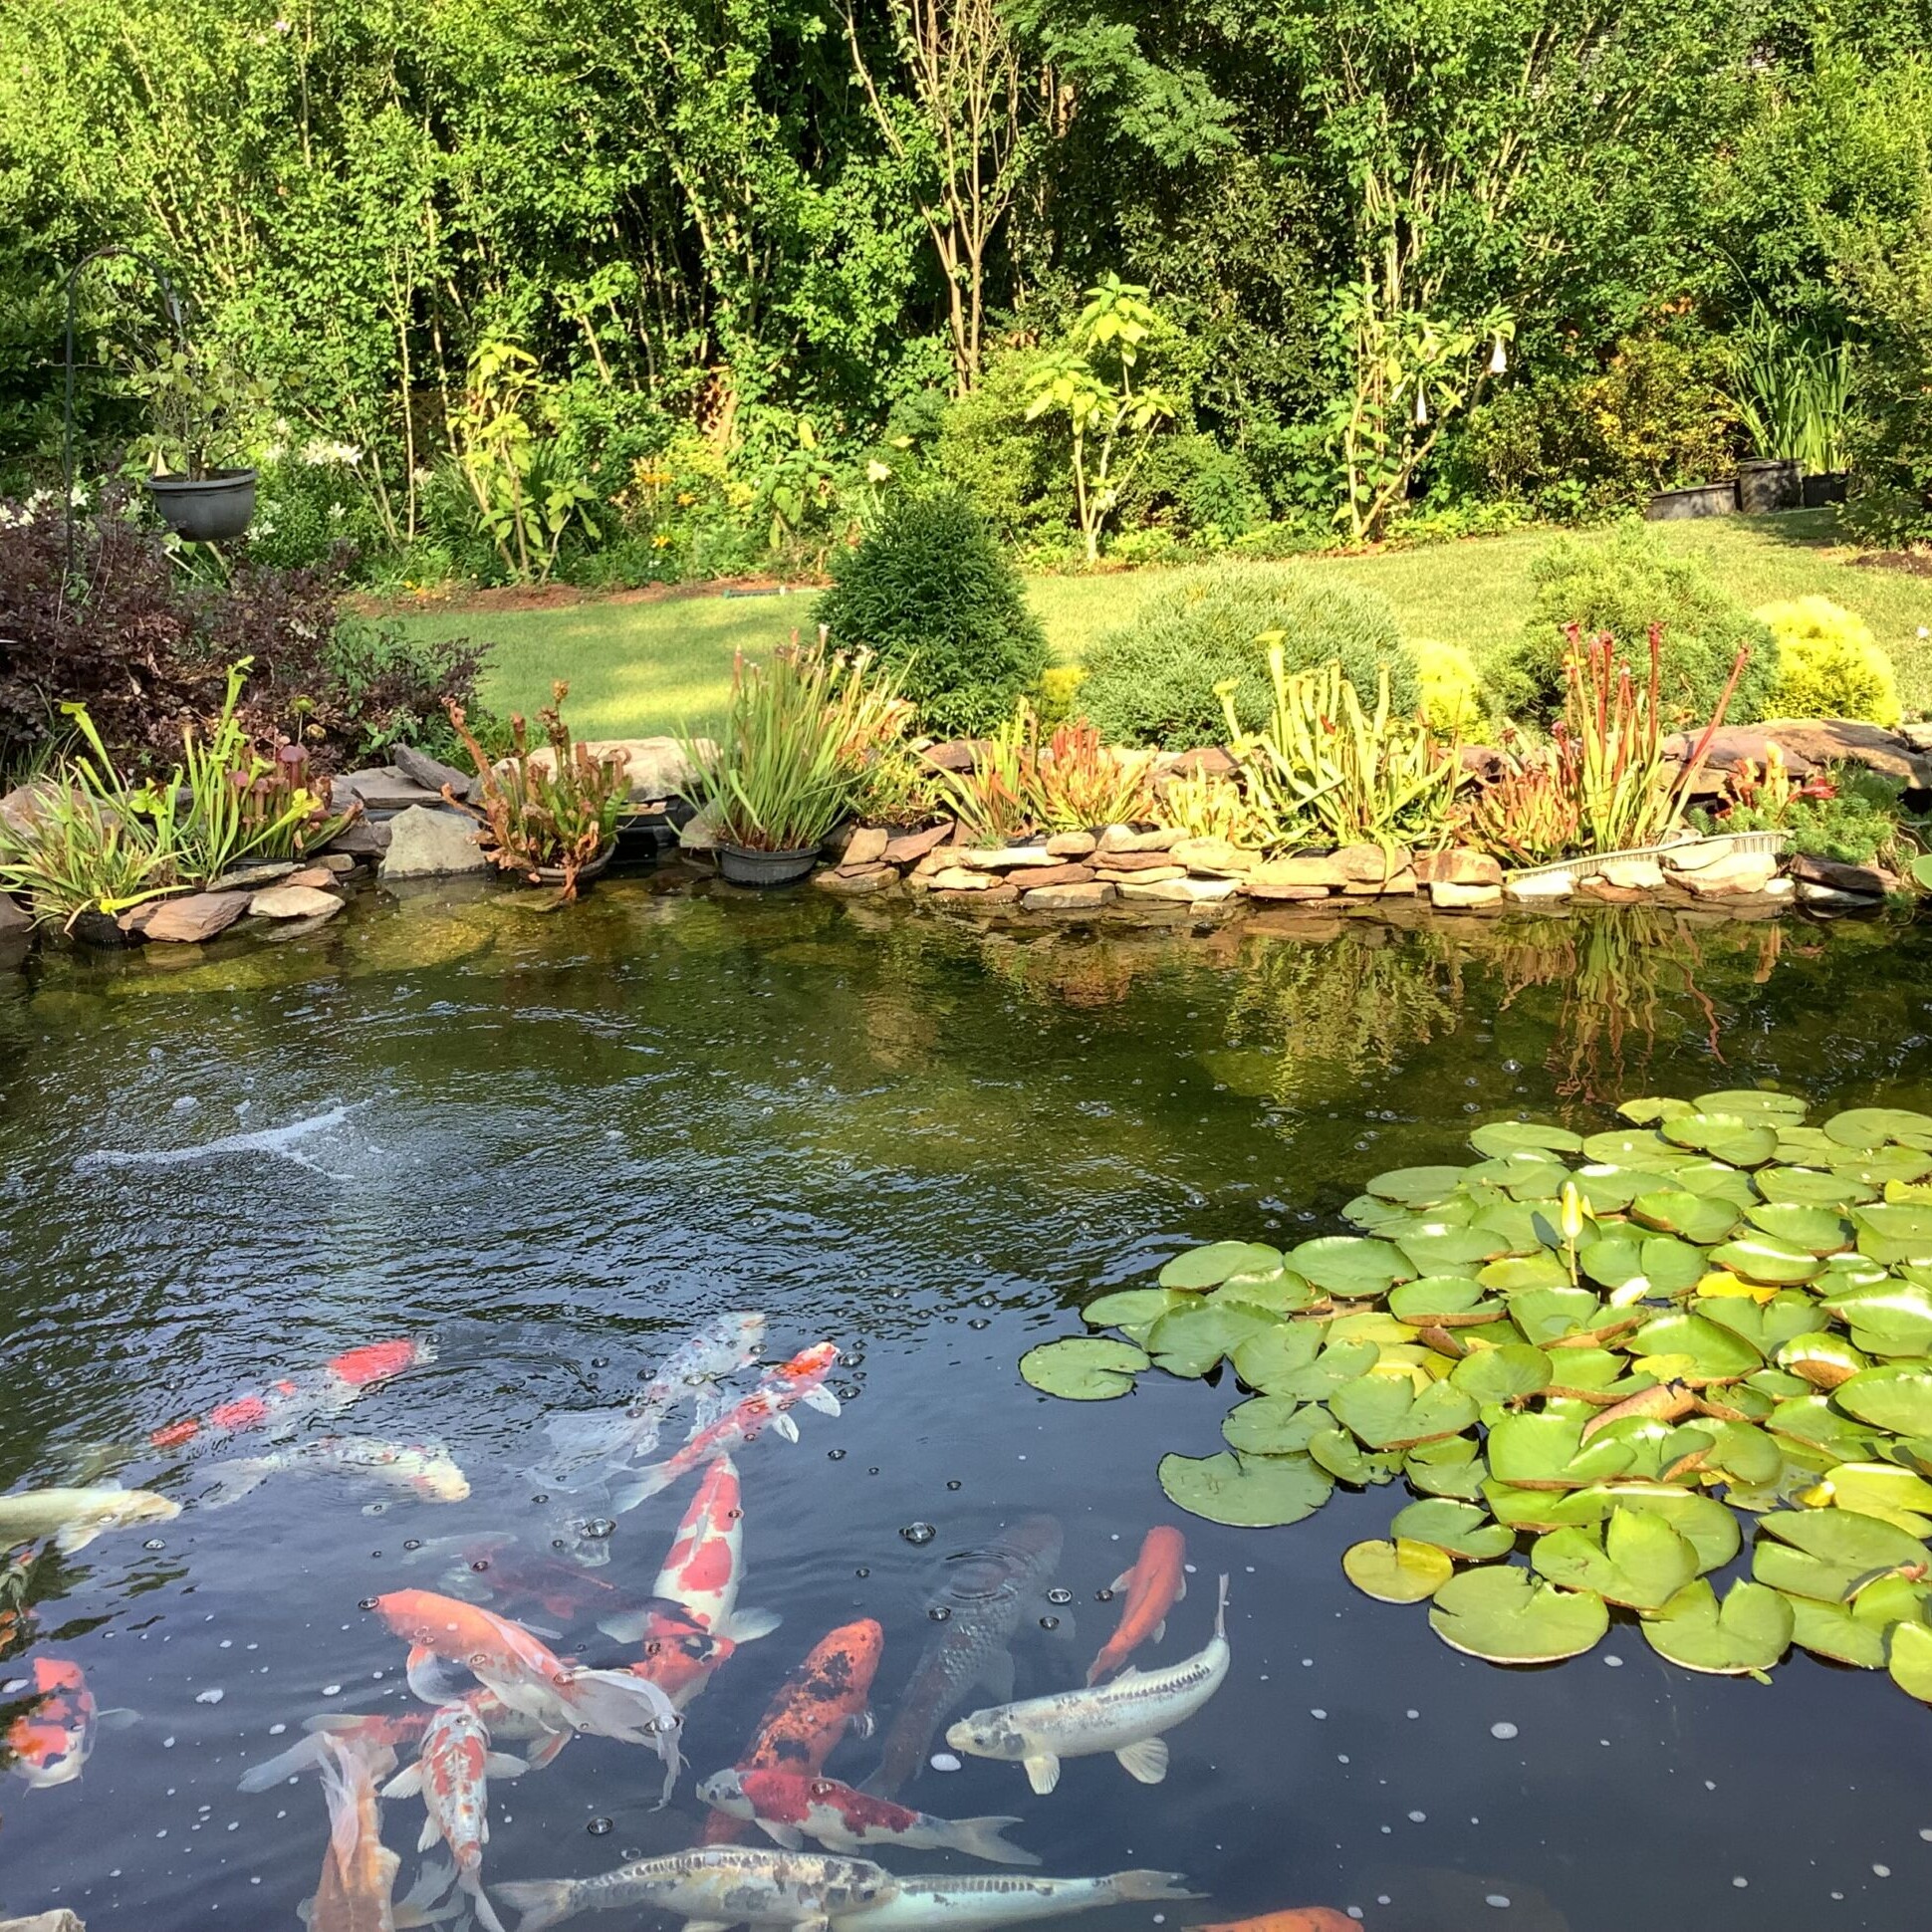 A pond with many fish swimming in it